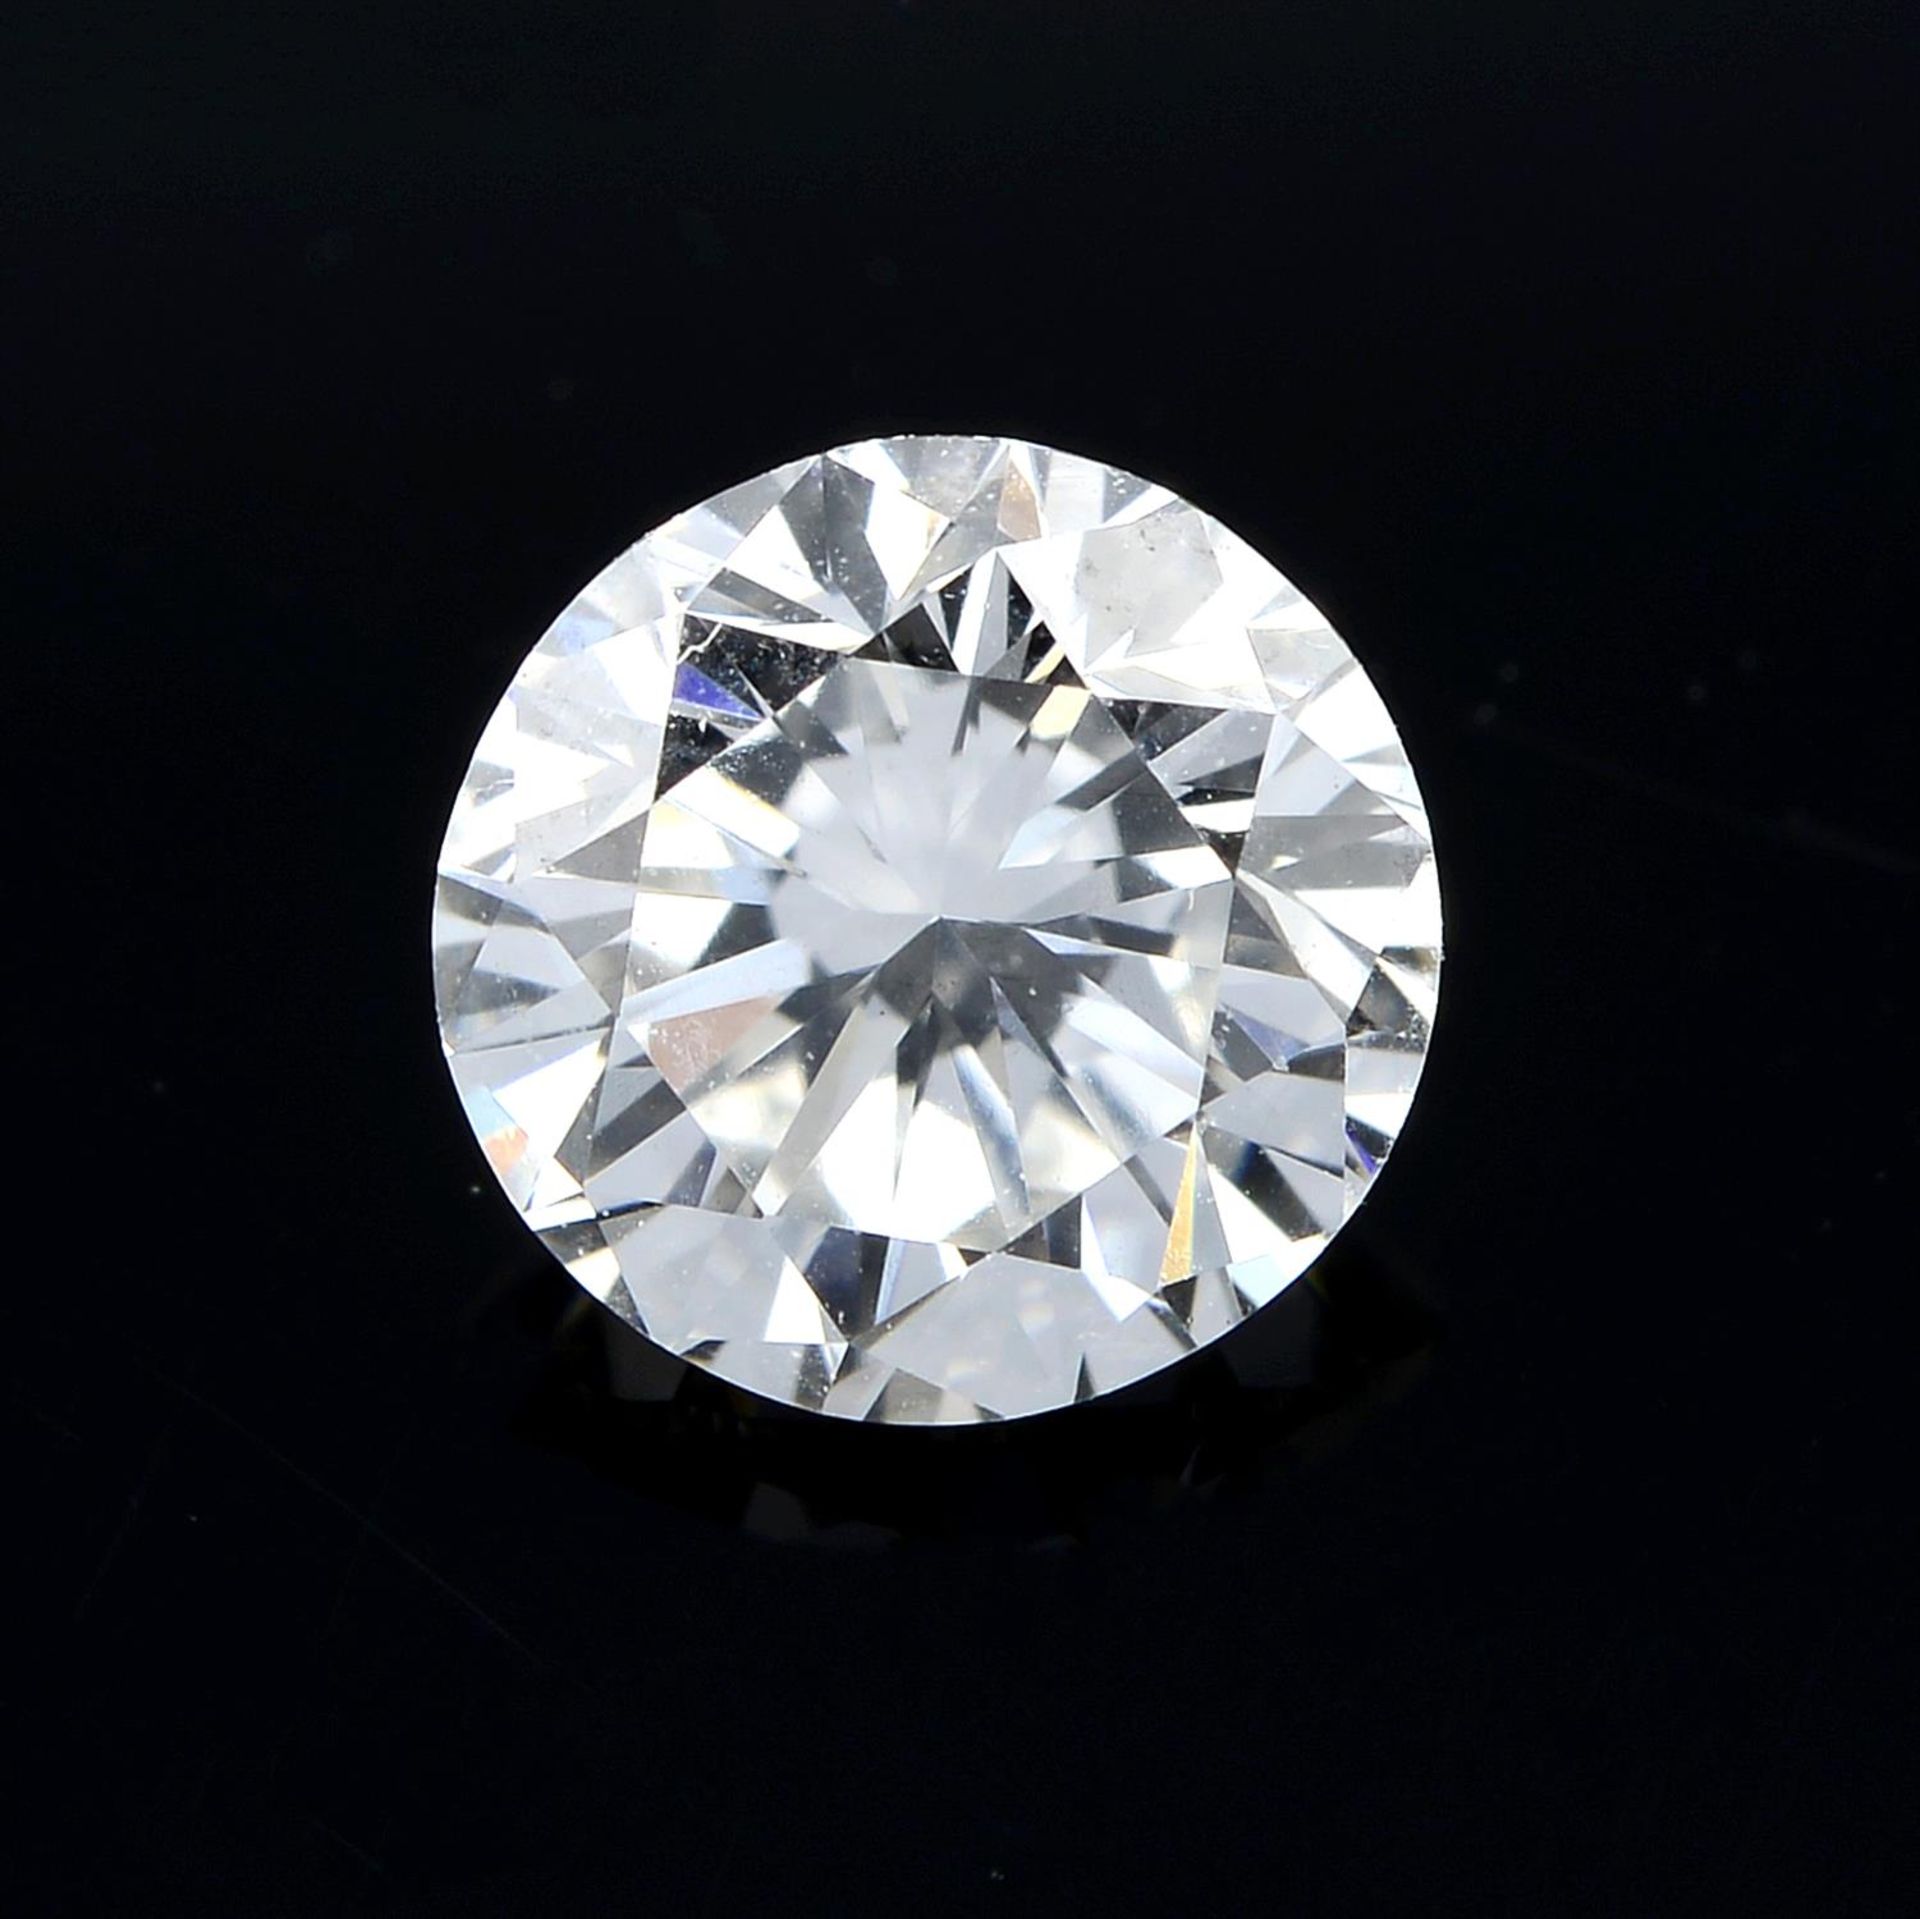 A round brilliant-cut diamond, approximate weight 0.53ct.